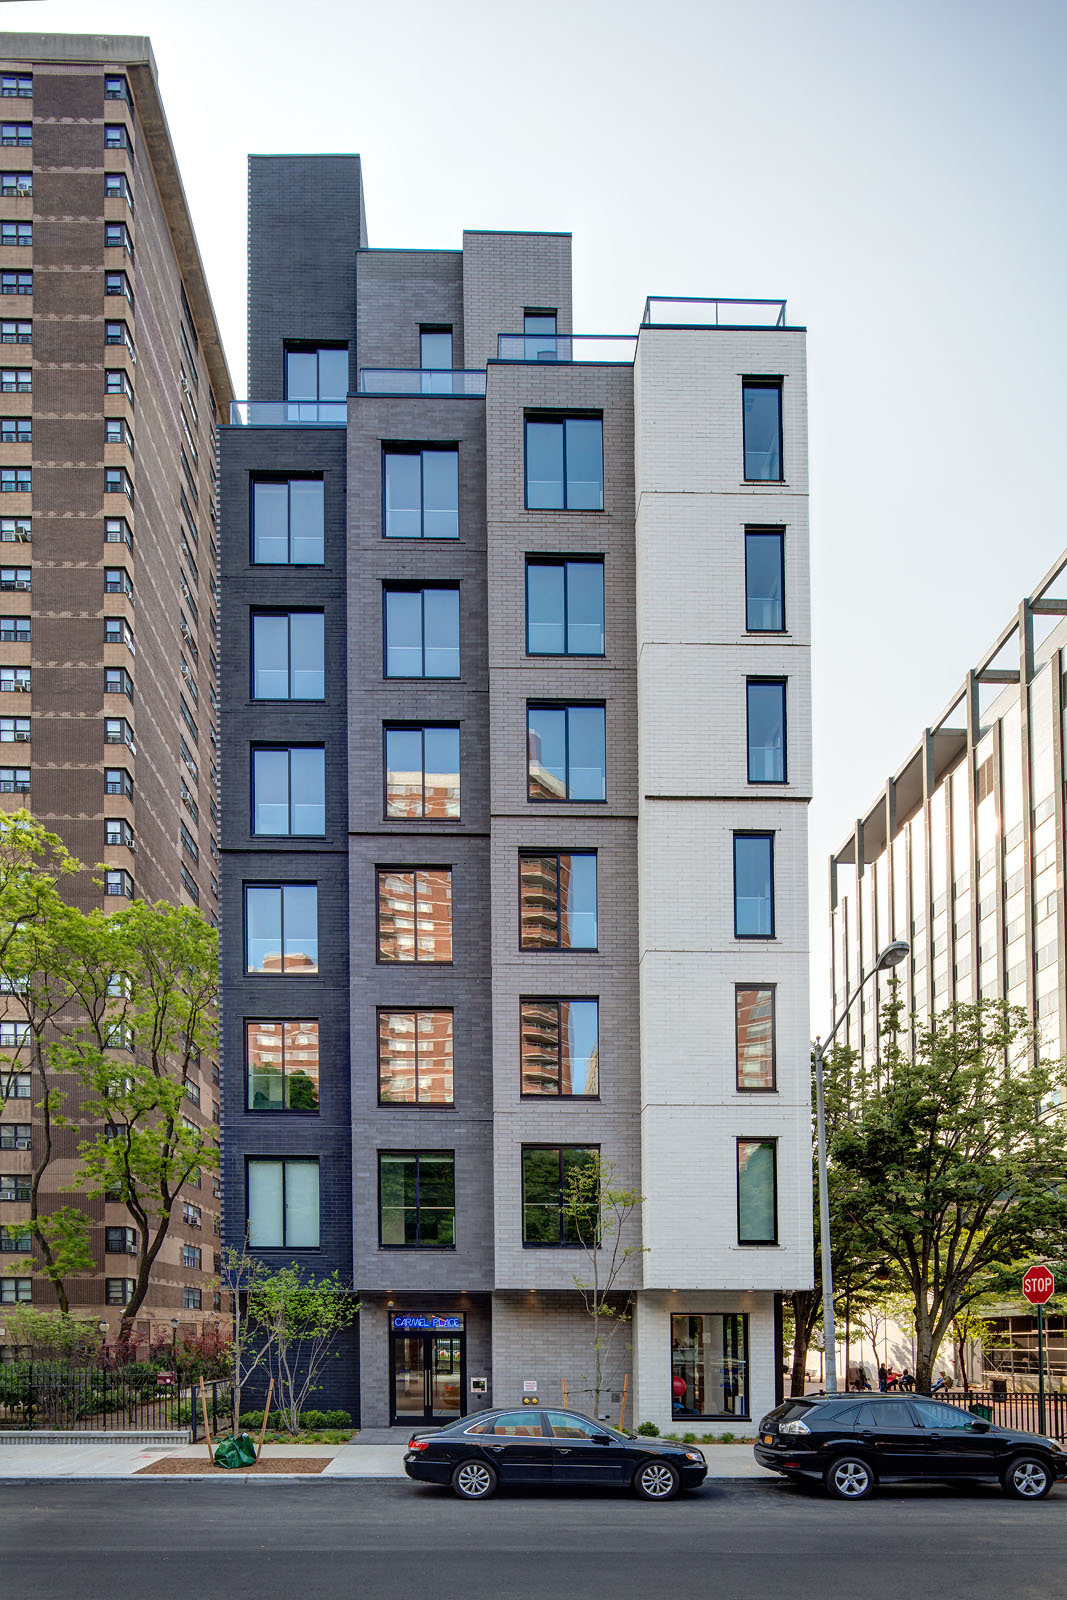 Winco’s 3410 sliding window series with impact-resistant laminated glass was used to provide safety, security and greatly reduce noise from the outdoors at Carmel Place Apartments.